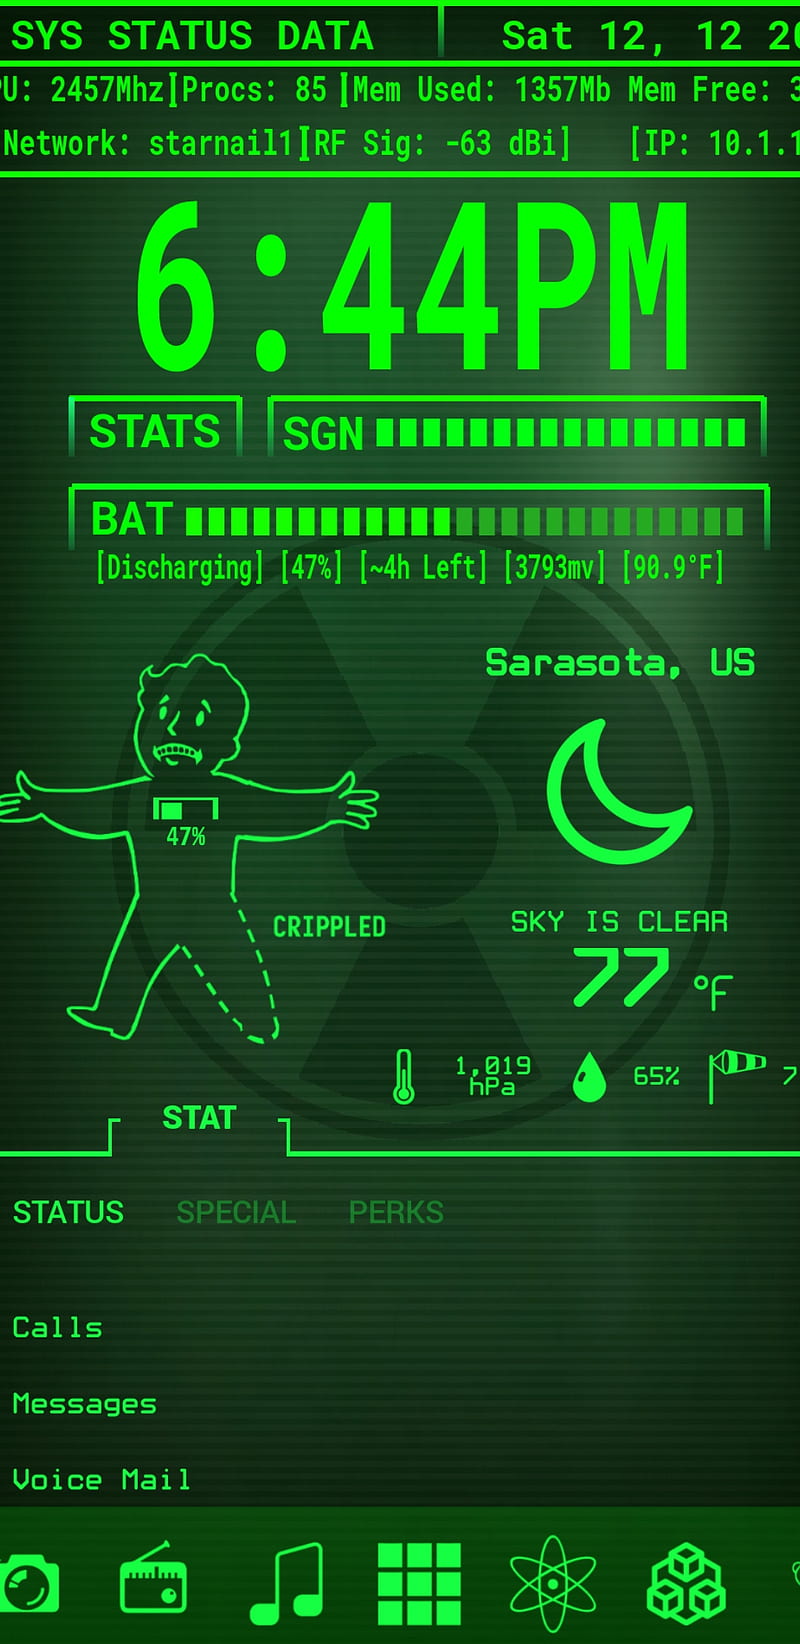 Fallout Mobile Wallpapers  Wallpaper Cave